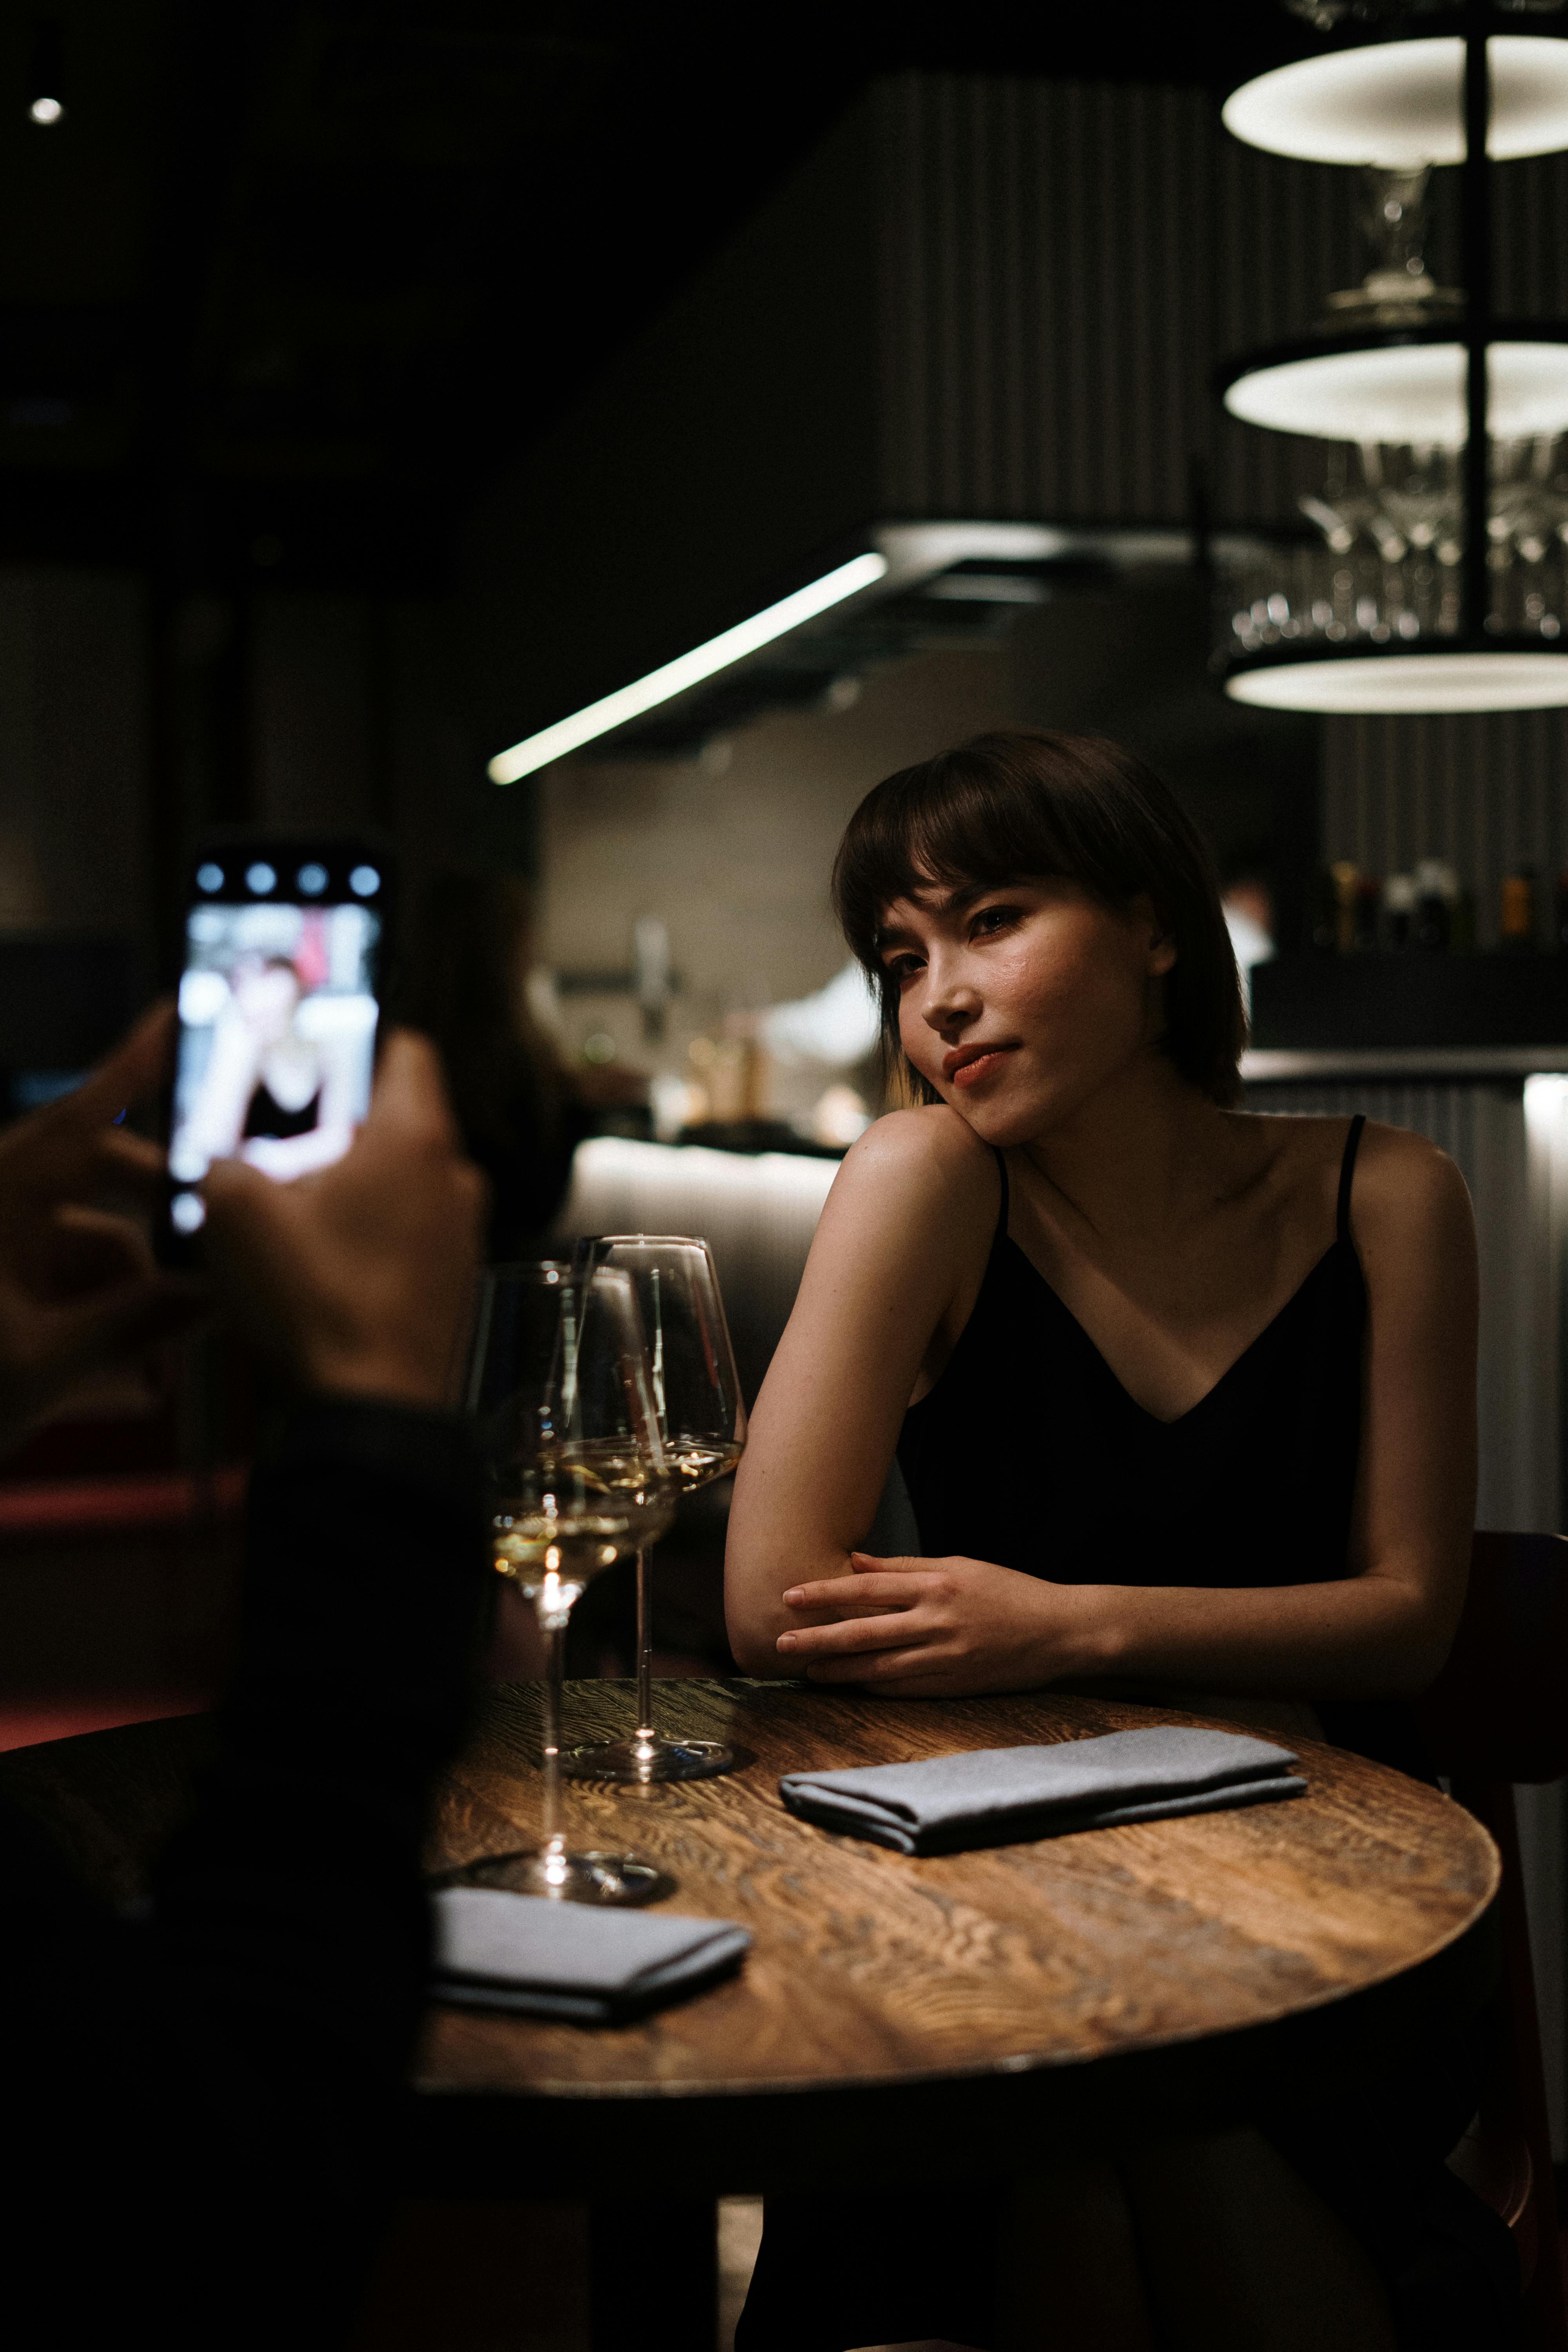 Woman in the dimly lit cafe | Source: Pexels